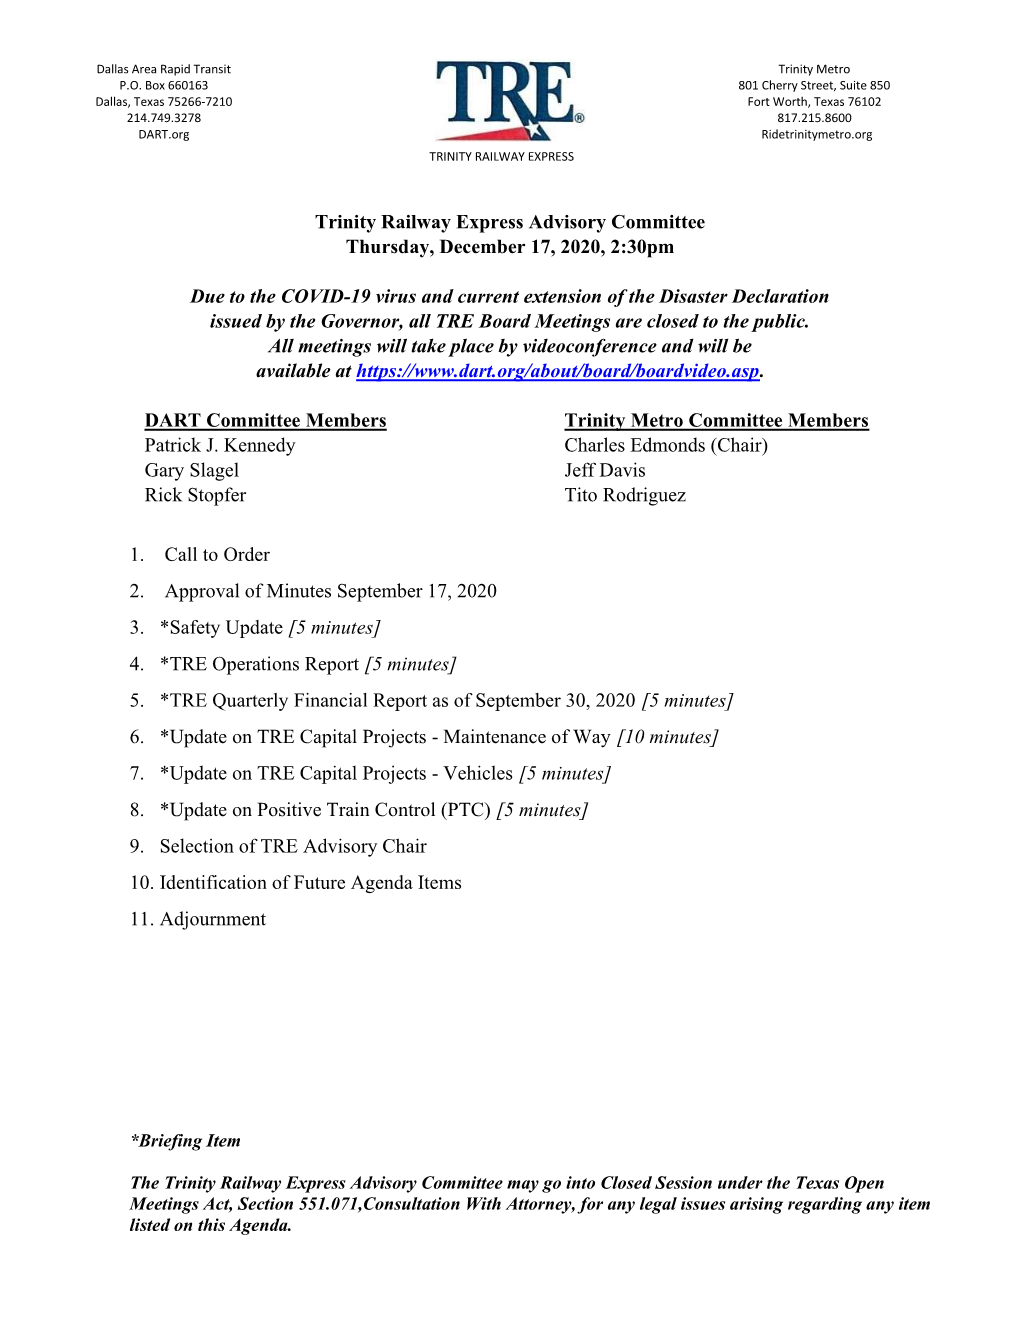 Trinity Railway Express Advisory Committee Thursday, December 17, 2020, 2:30Pm Due to the COVID-19 Virus and Current Extension O